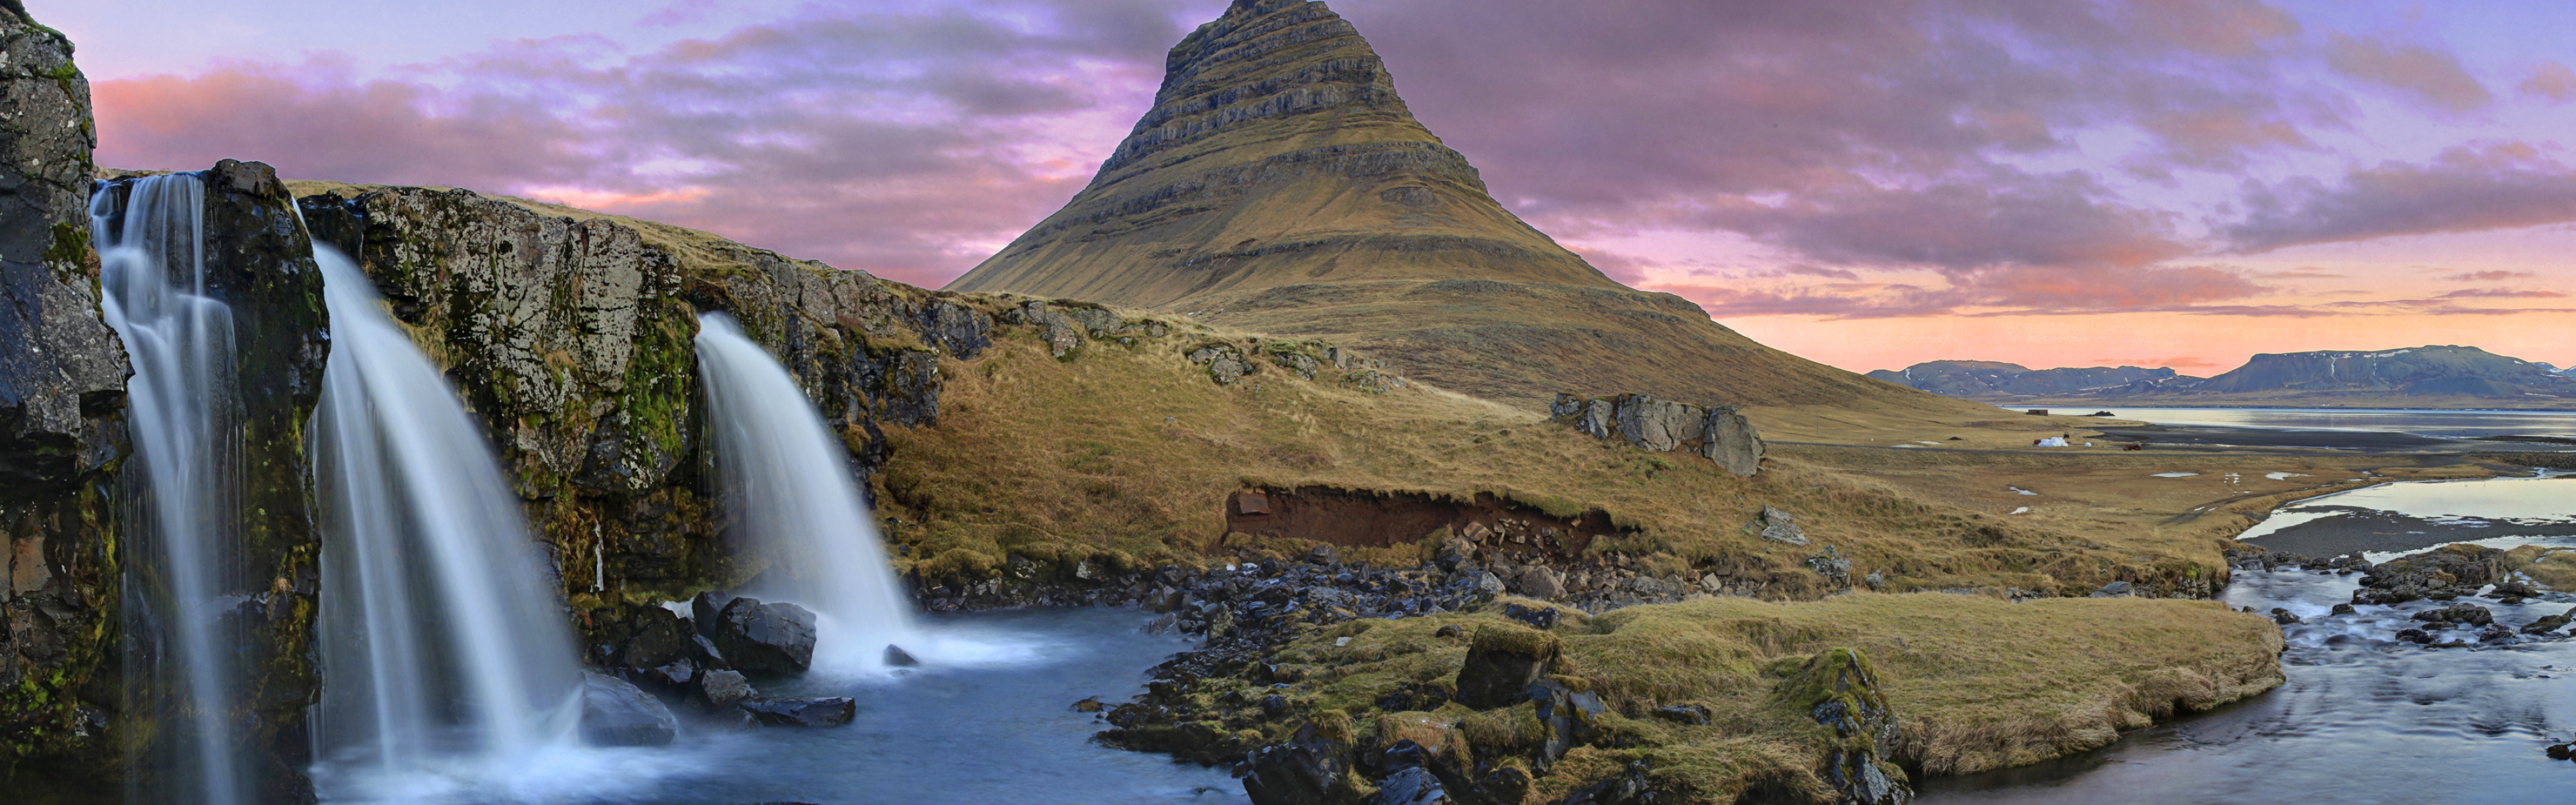 Landscape: The Kirkjufell mountain, The north coast of Iceland's Snaefellsnes peninsula. 3840x1200 Dual Screen Background.